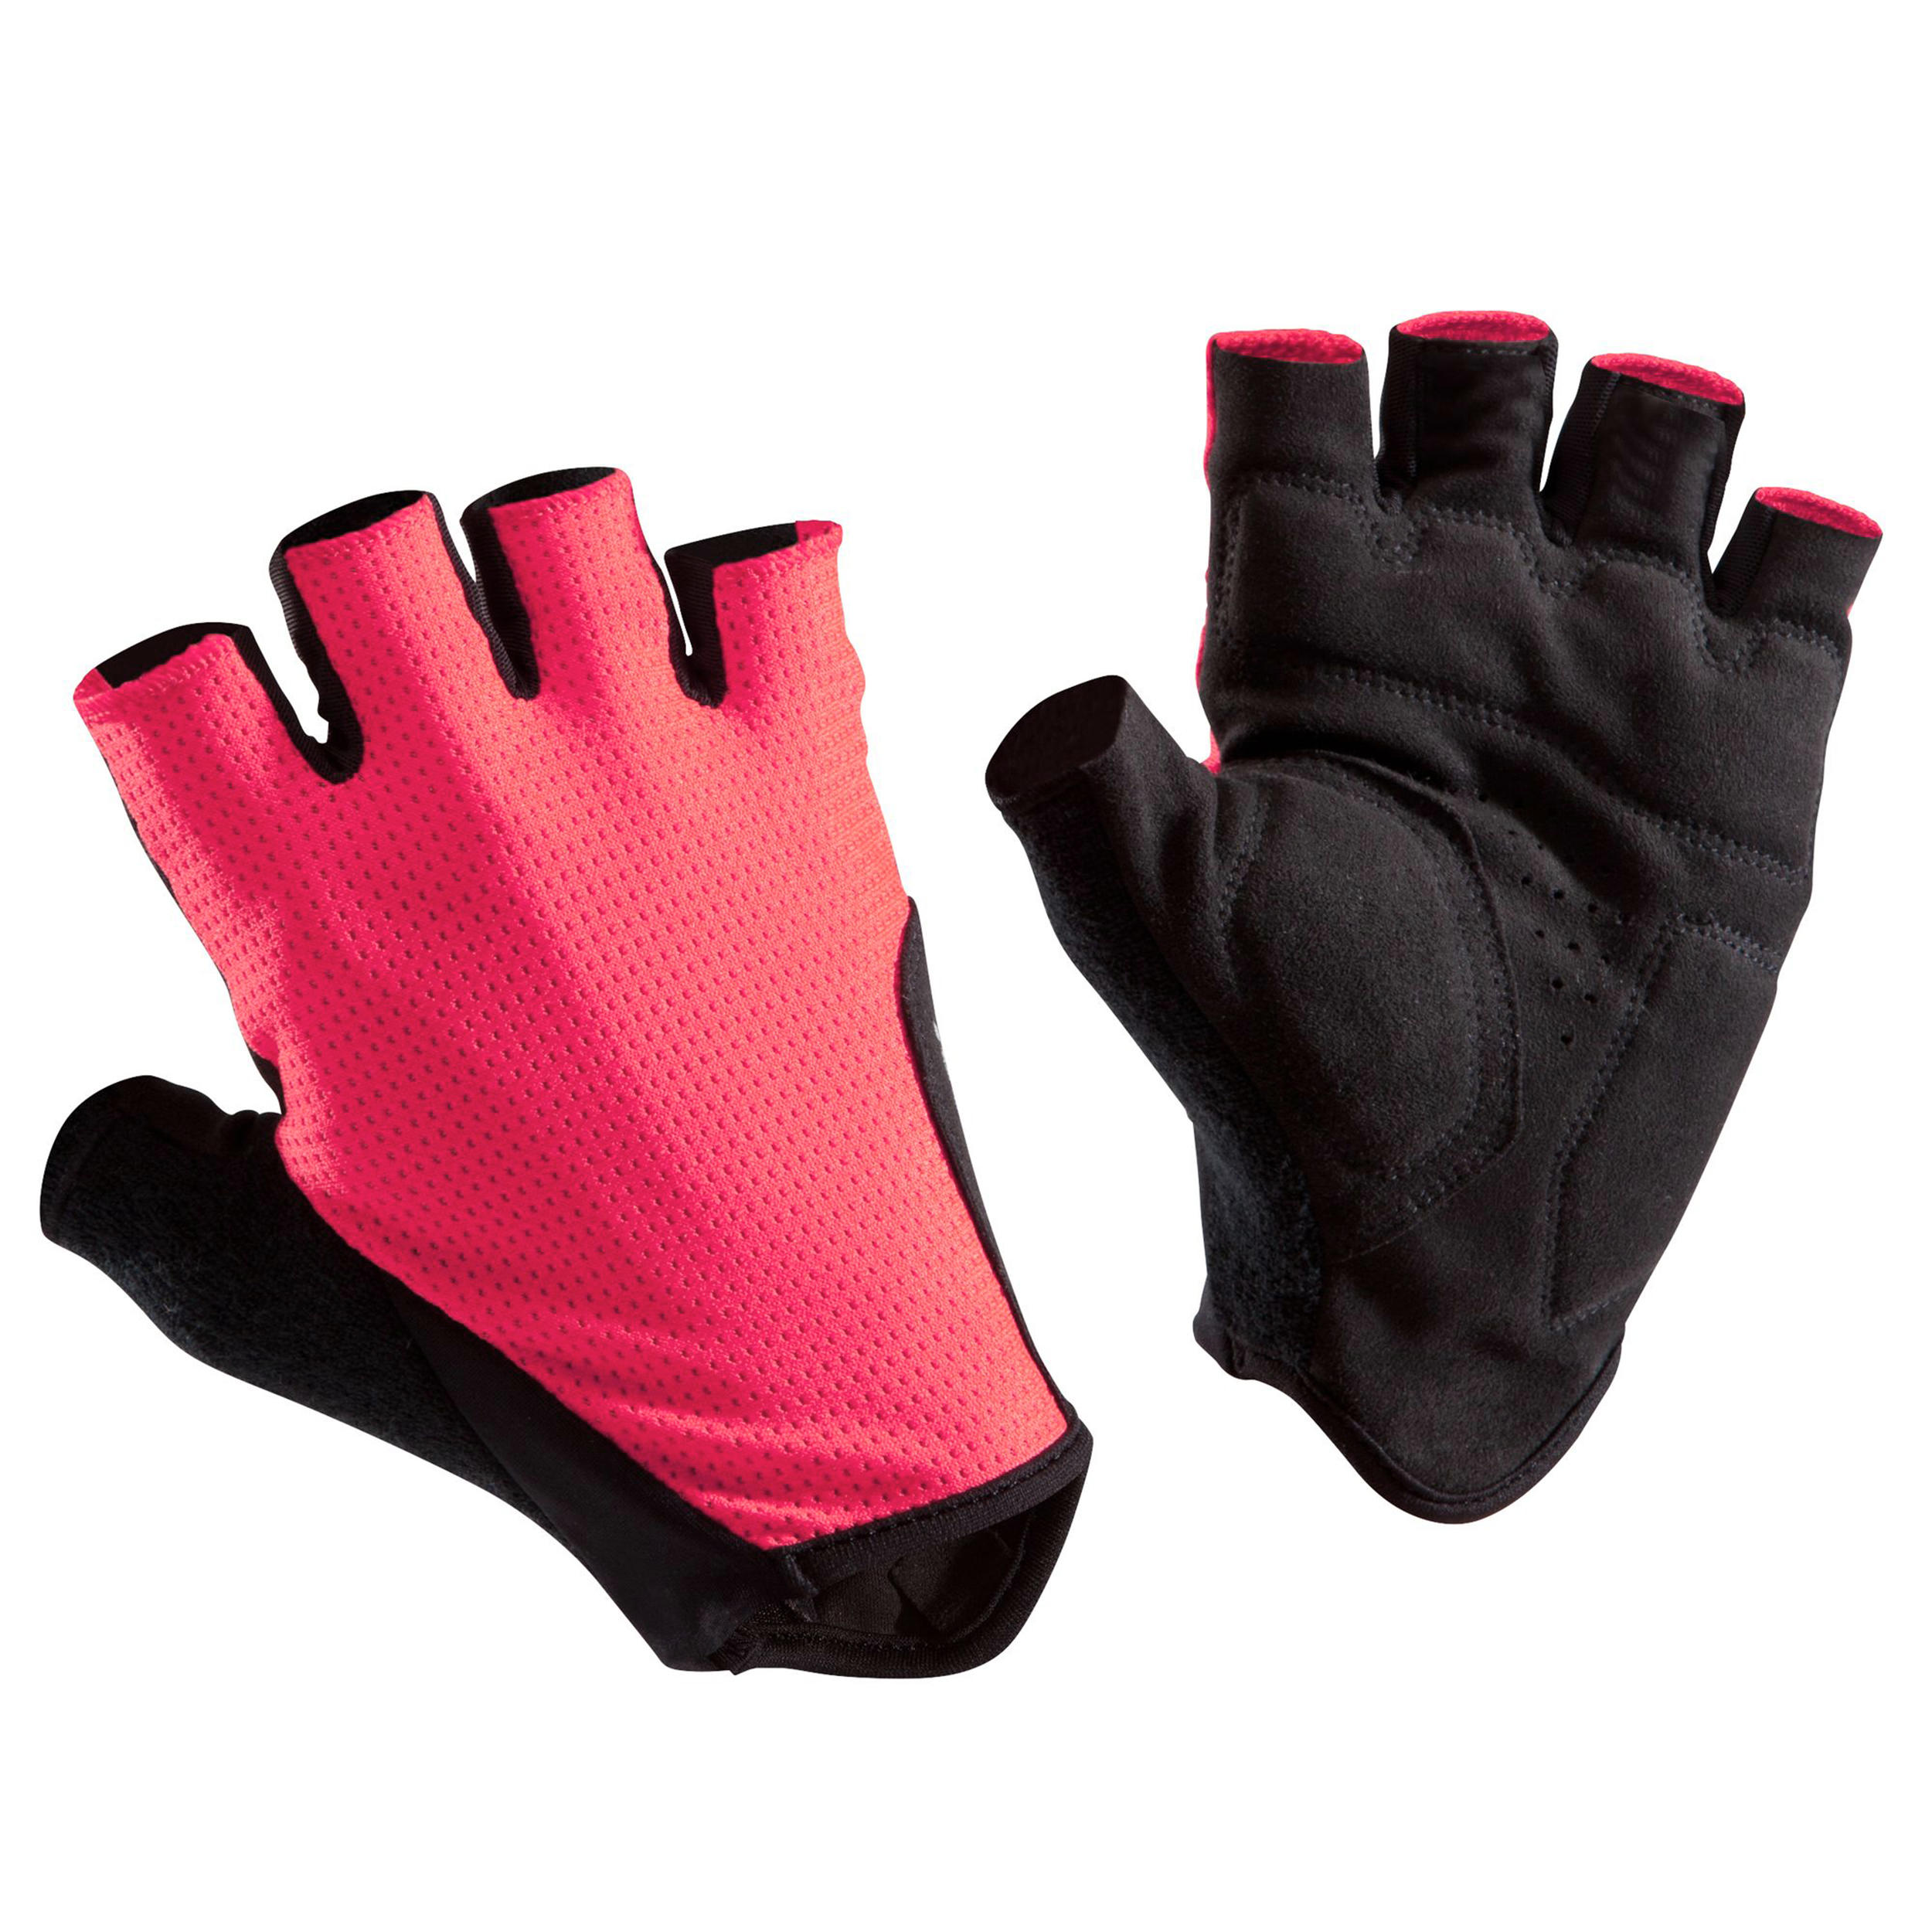 500 Road Cycling Gloves Neon Pink 